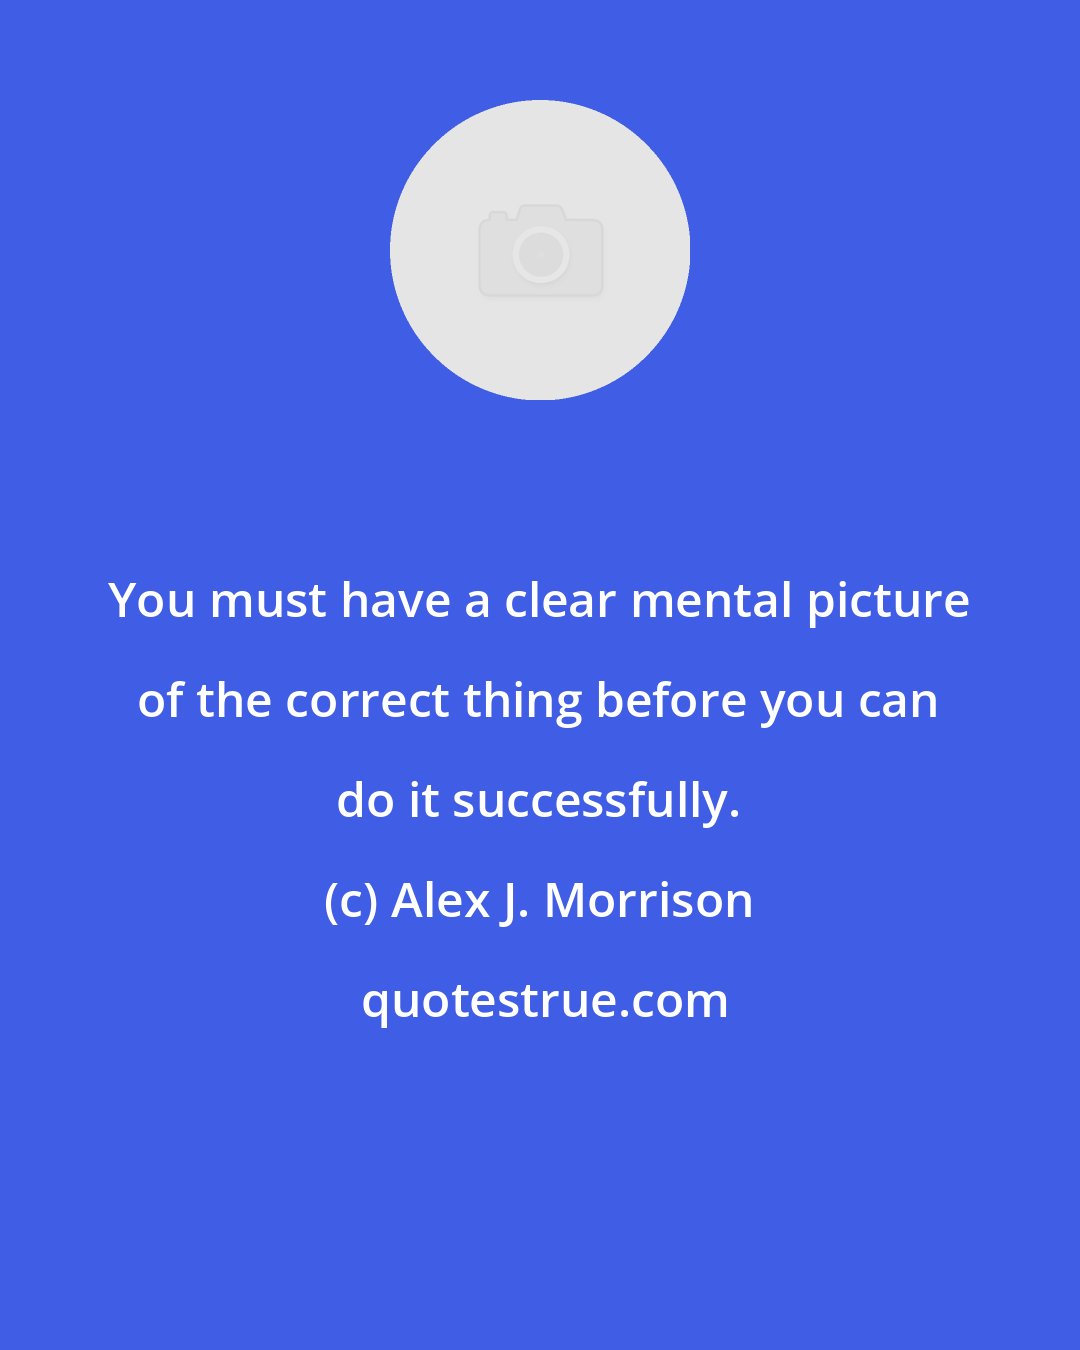 Alex J. Morrison: You must have a clear mental picture of the correct thing before you can do it successfully.